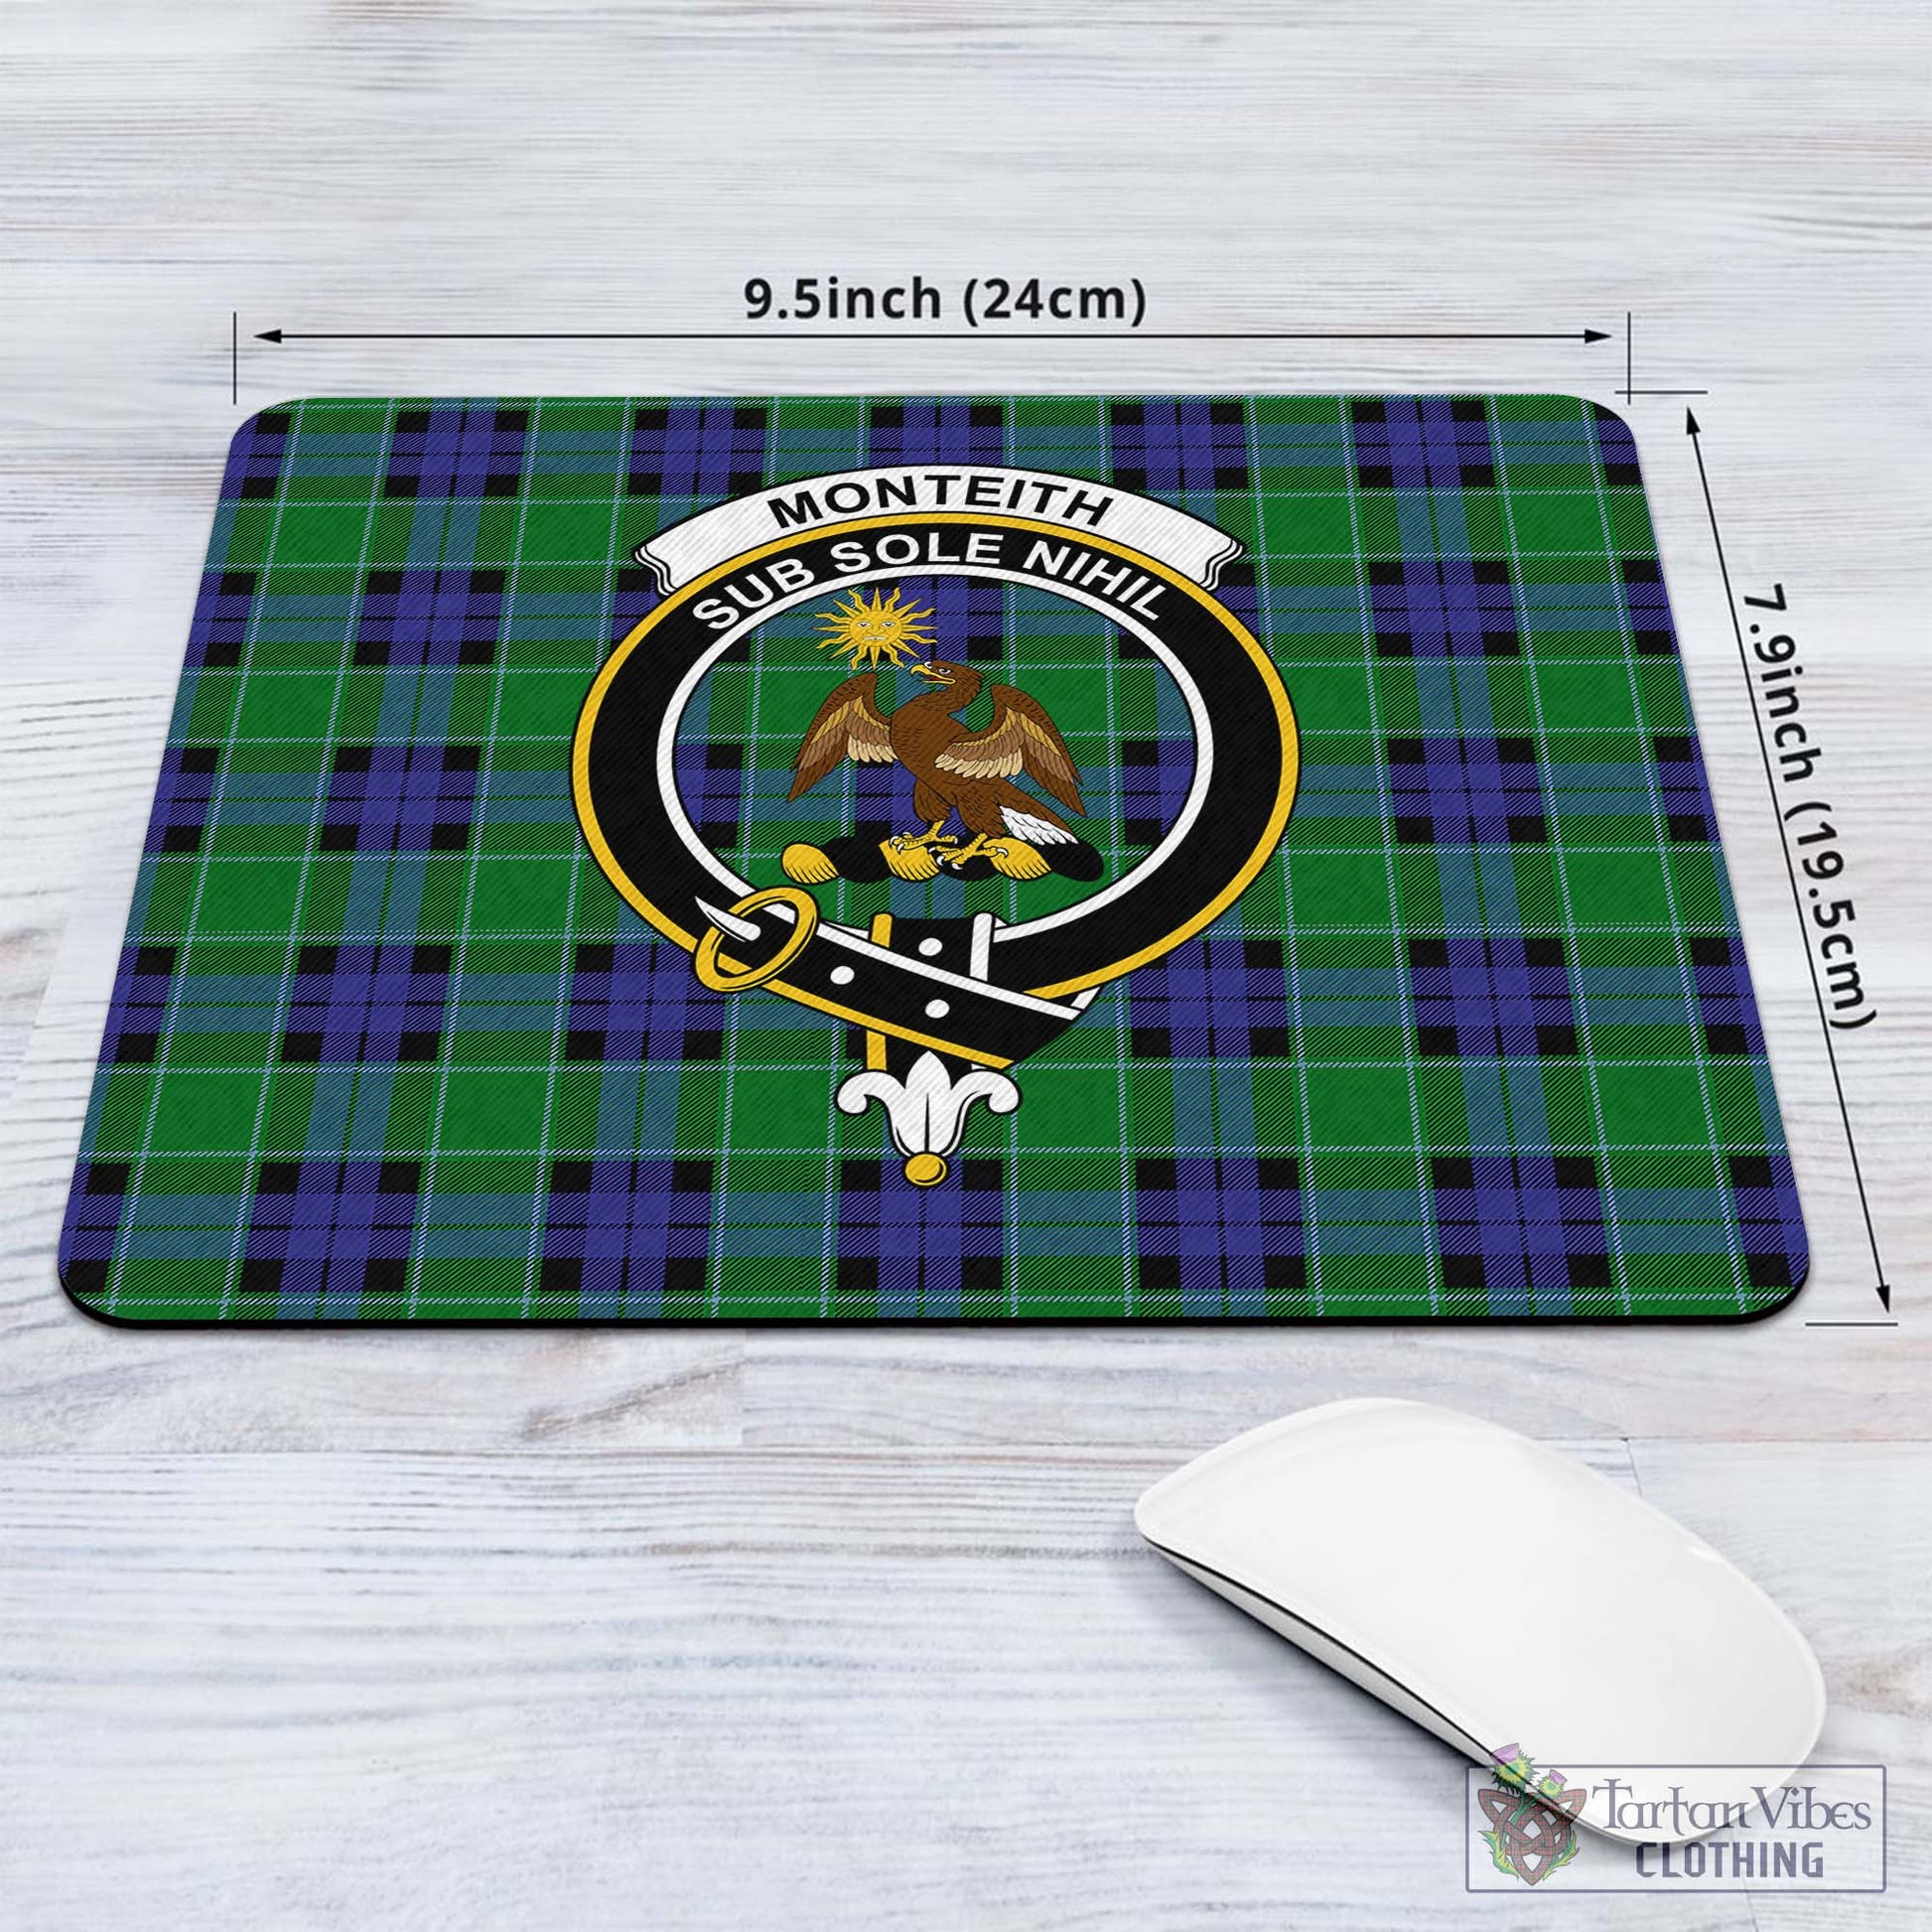 Tartan Vibes Clothing Monteith Tartan Mouse Pad with Family Crest